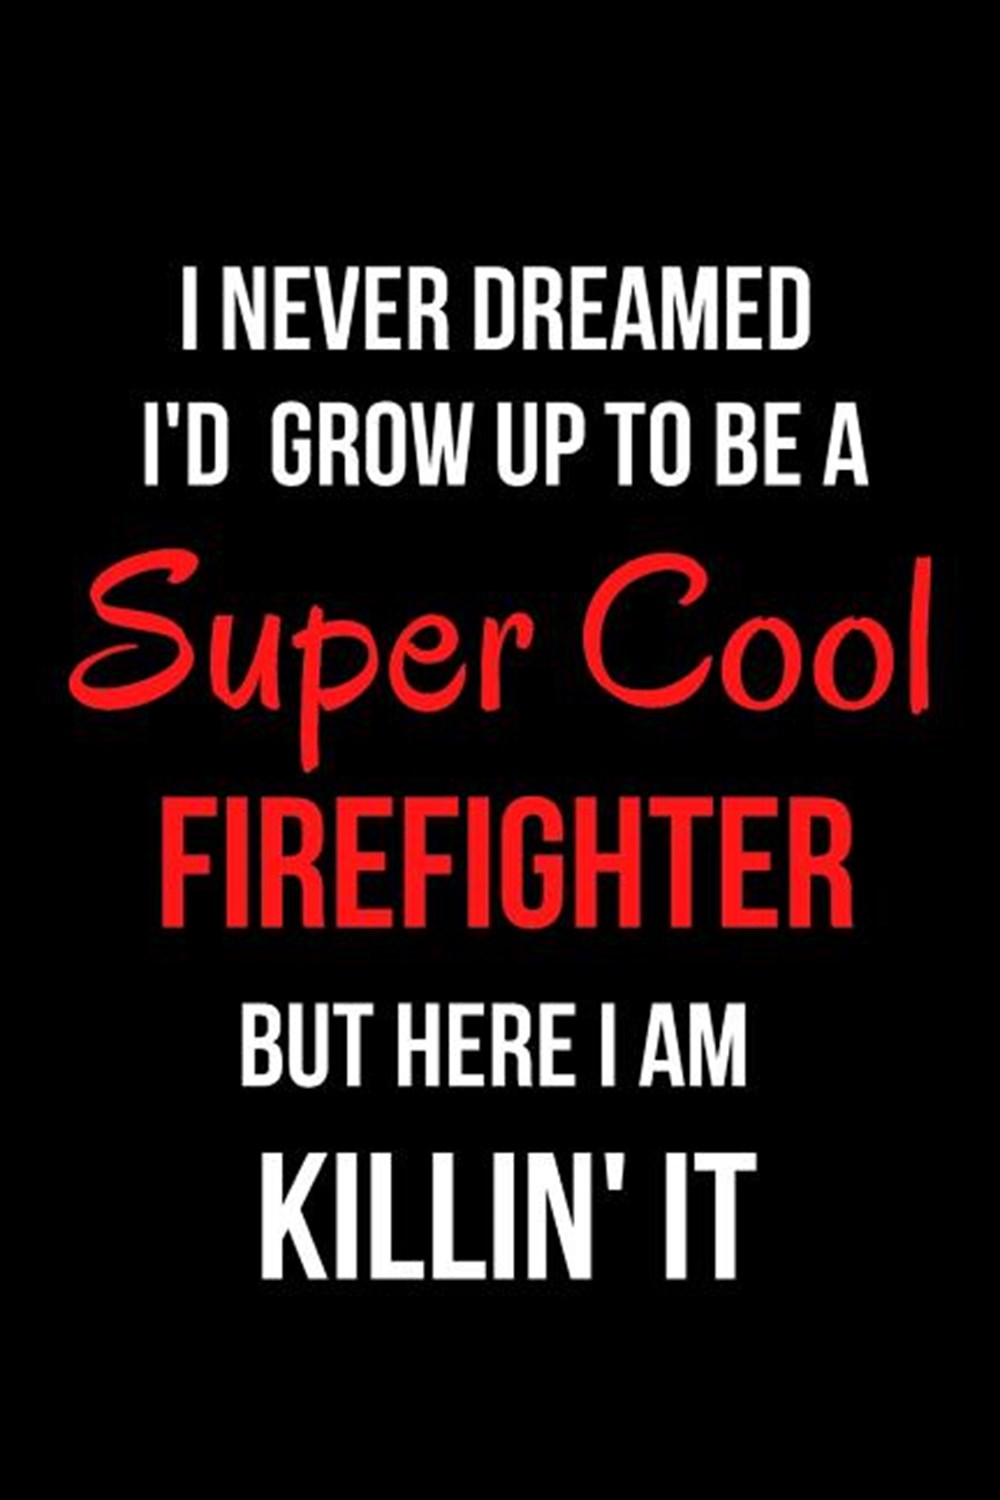 I Never Dreamed I'd Grow Up to Be a Super Cool Firefighter But Here I Am Killin' It Blank Line Journ